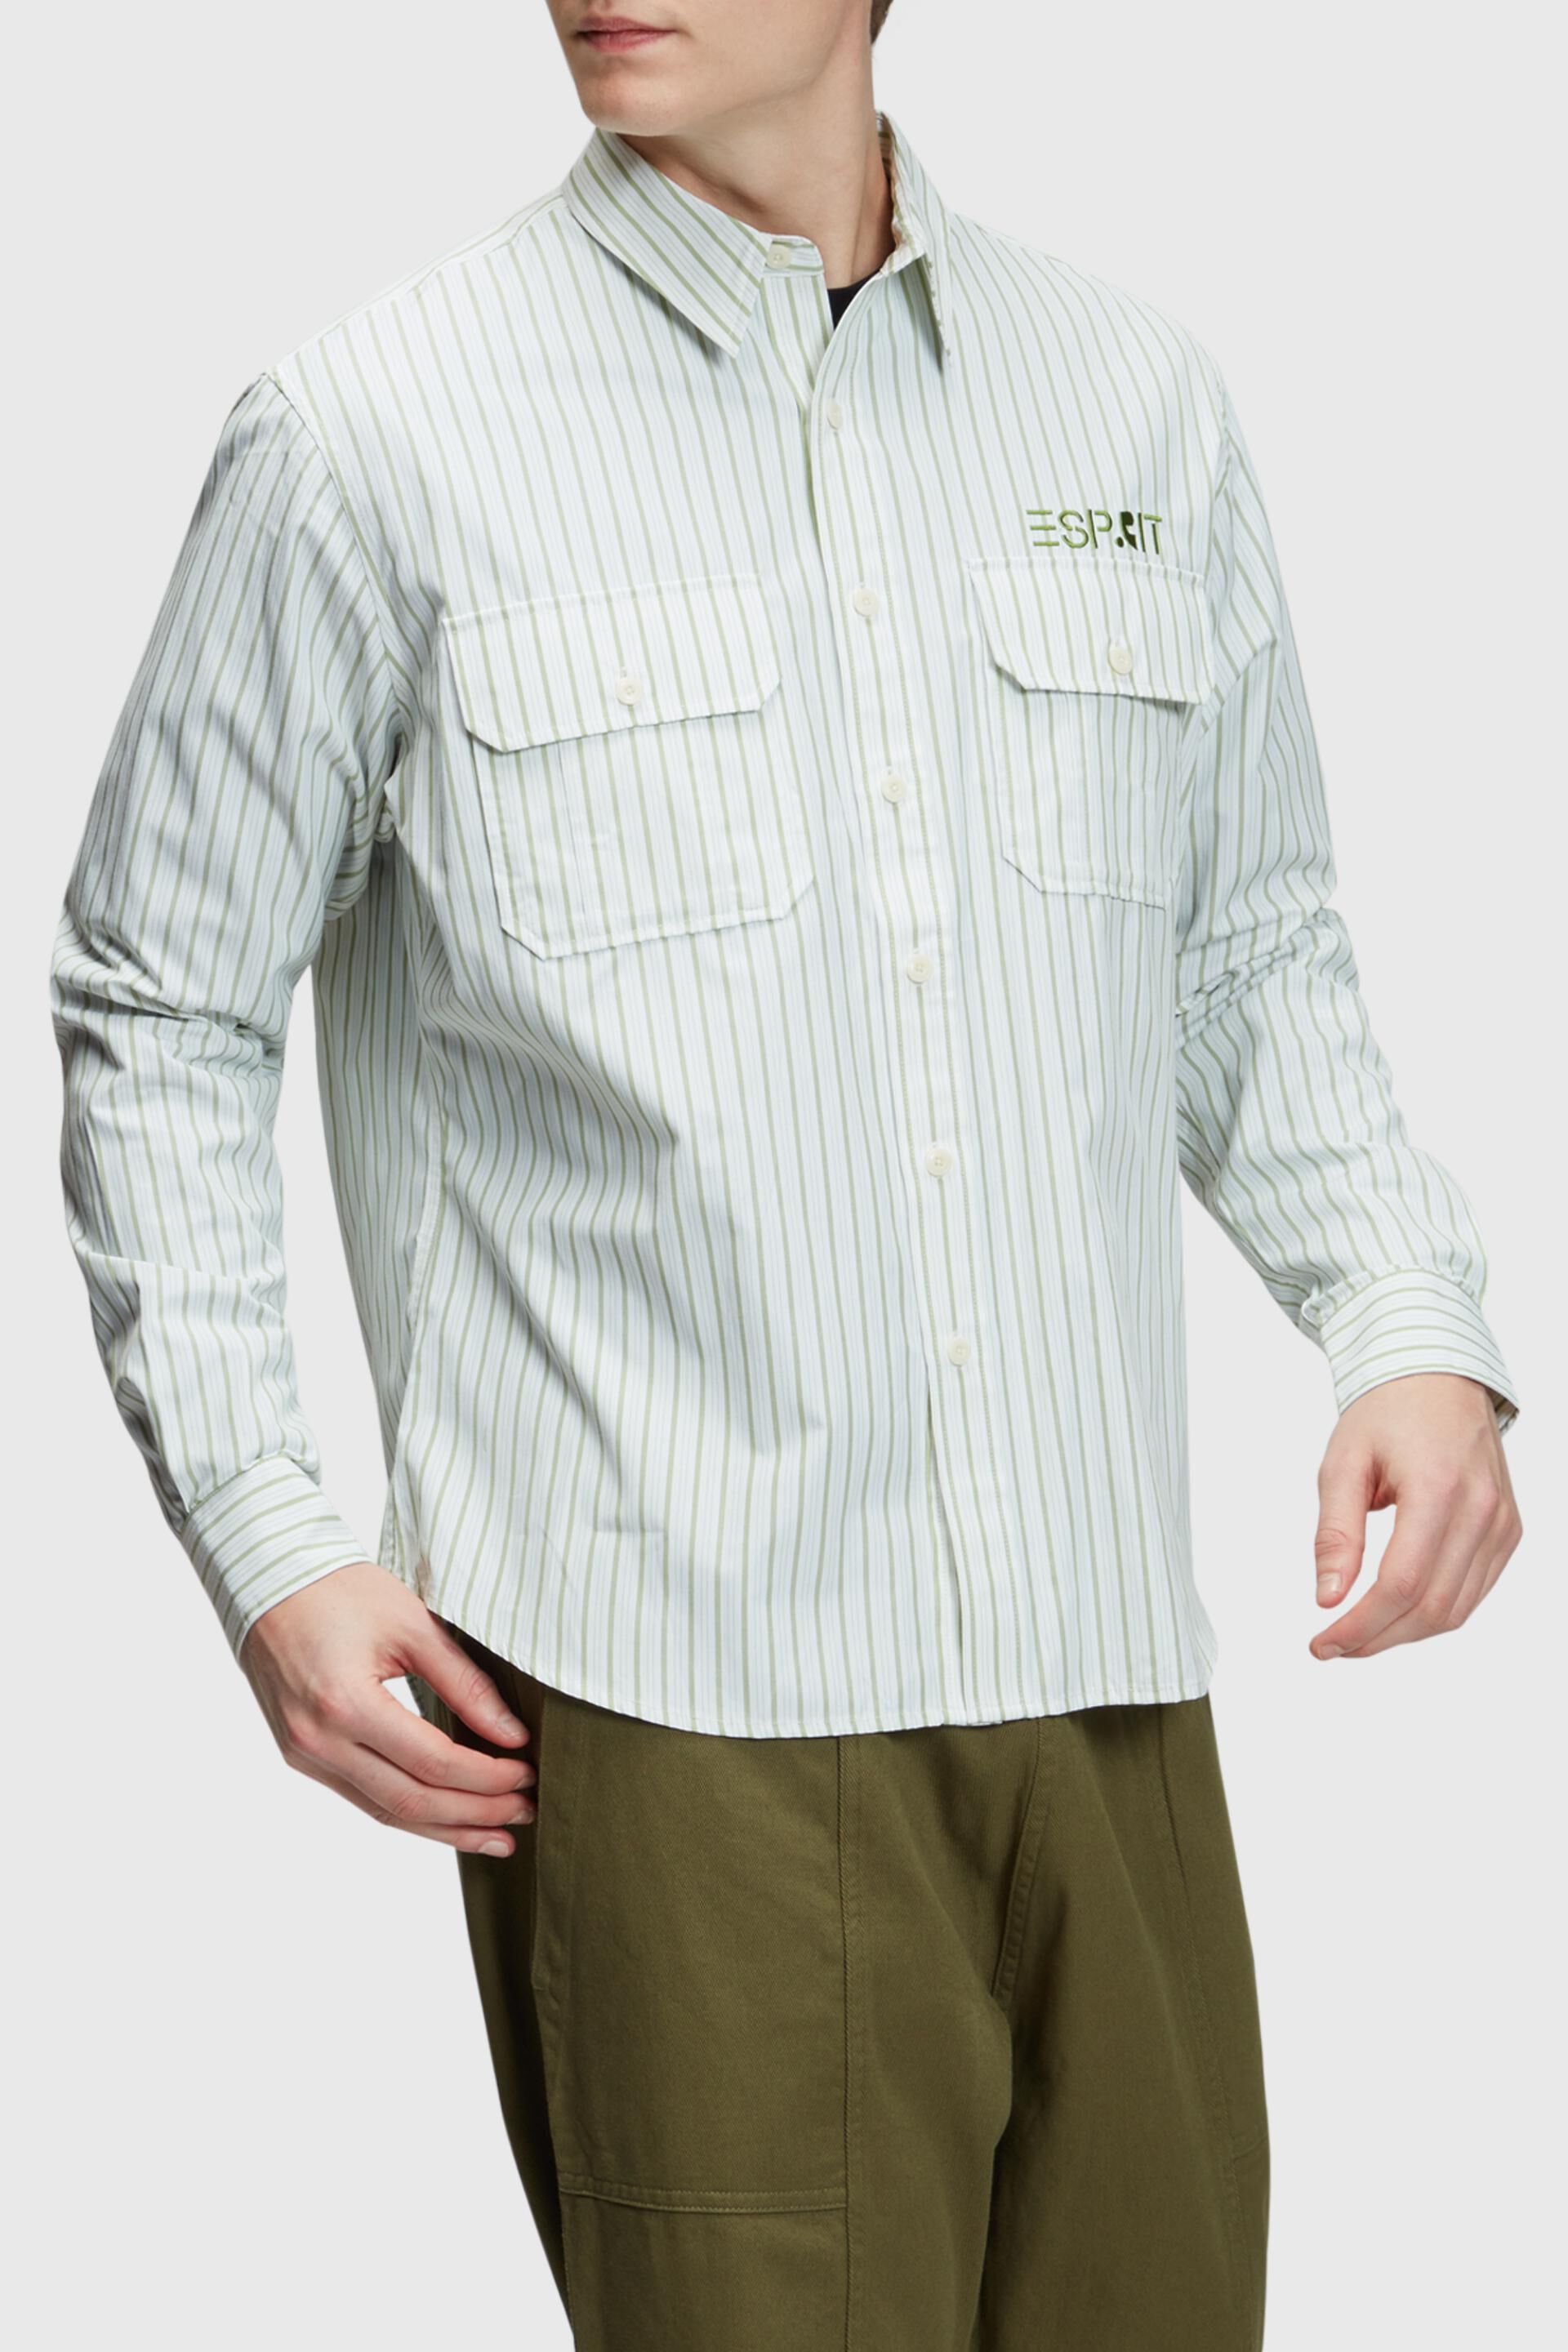 Esprit fit Relaxed shirt striped